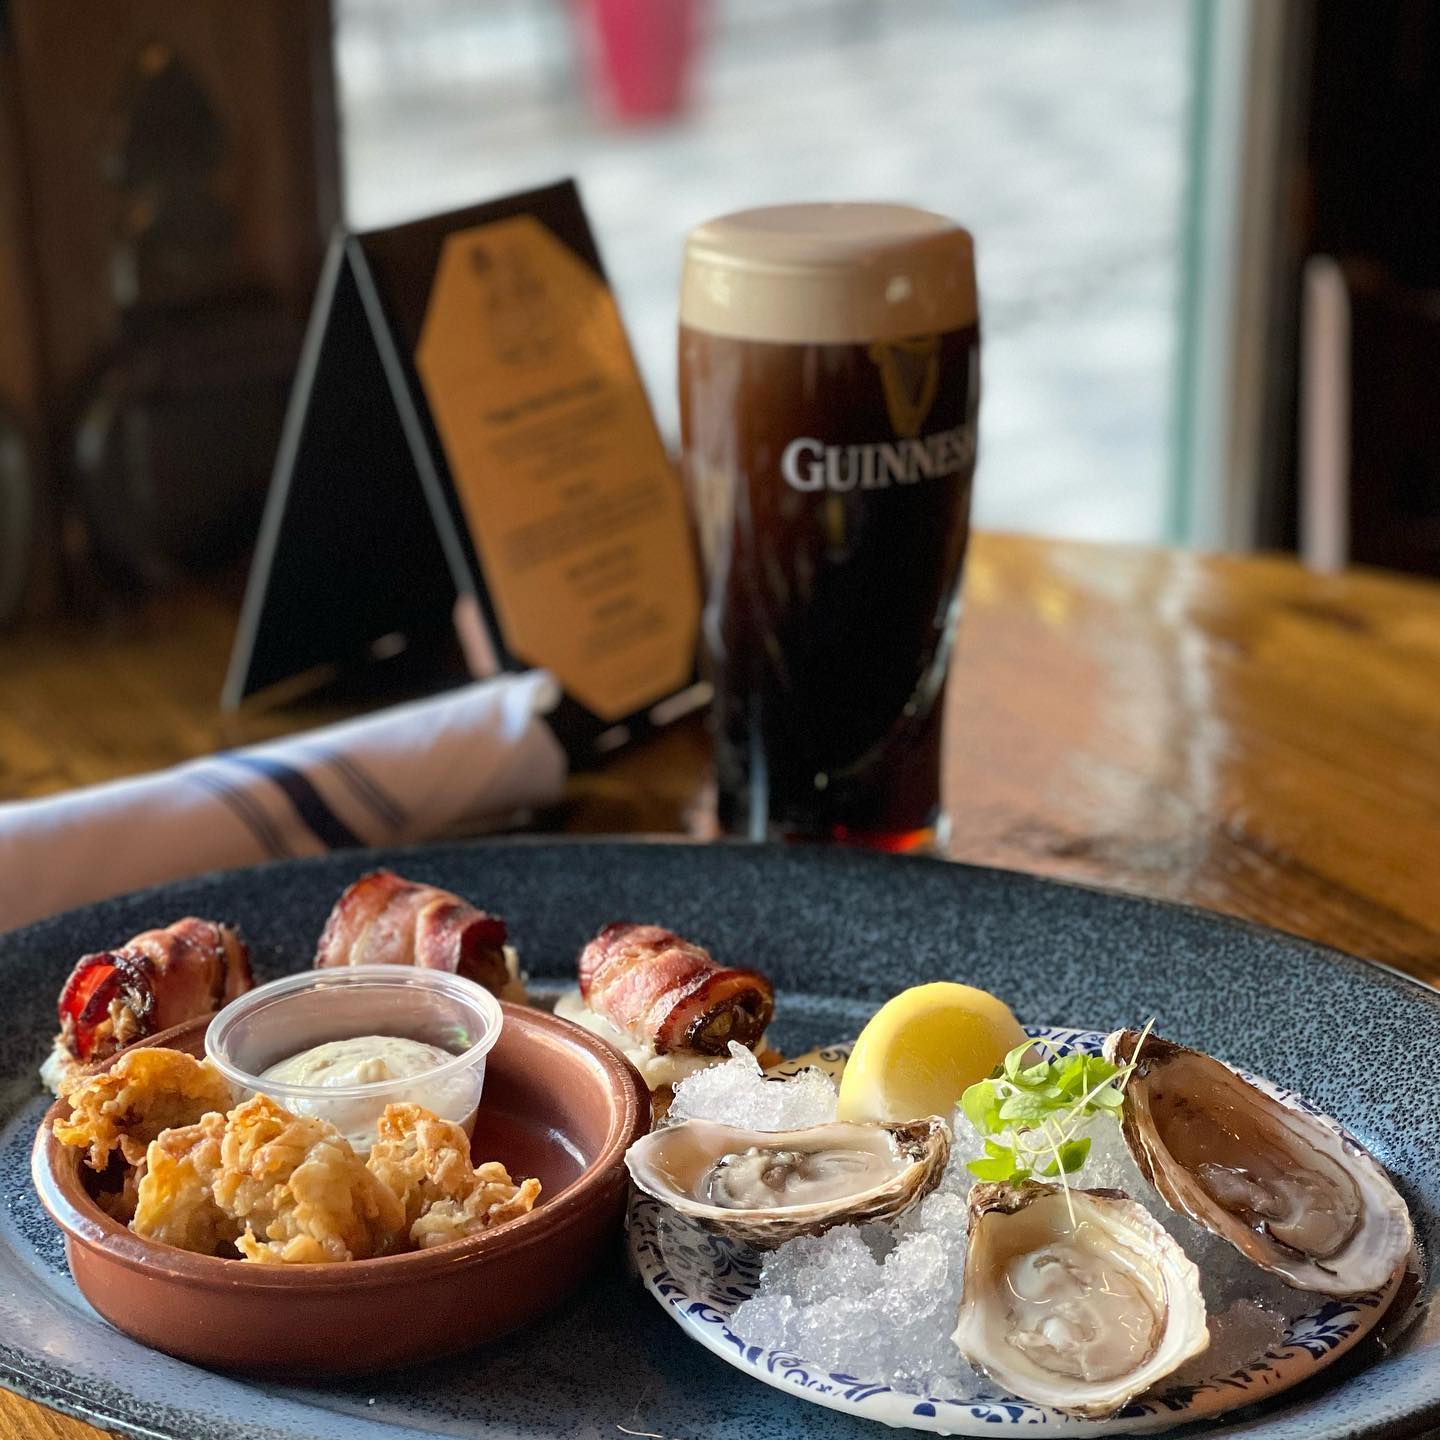 Oysters and Guinness at Mattie & Eddie's in Arlington. Photograph courtesy of Mattie & Eddie's